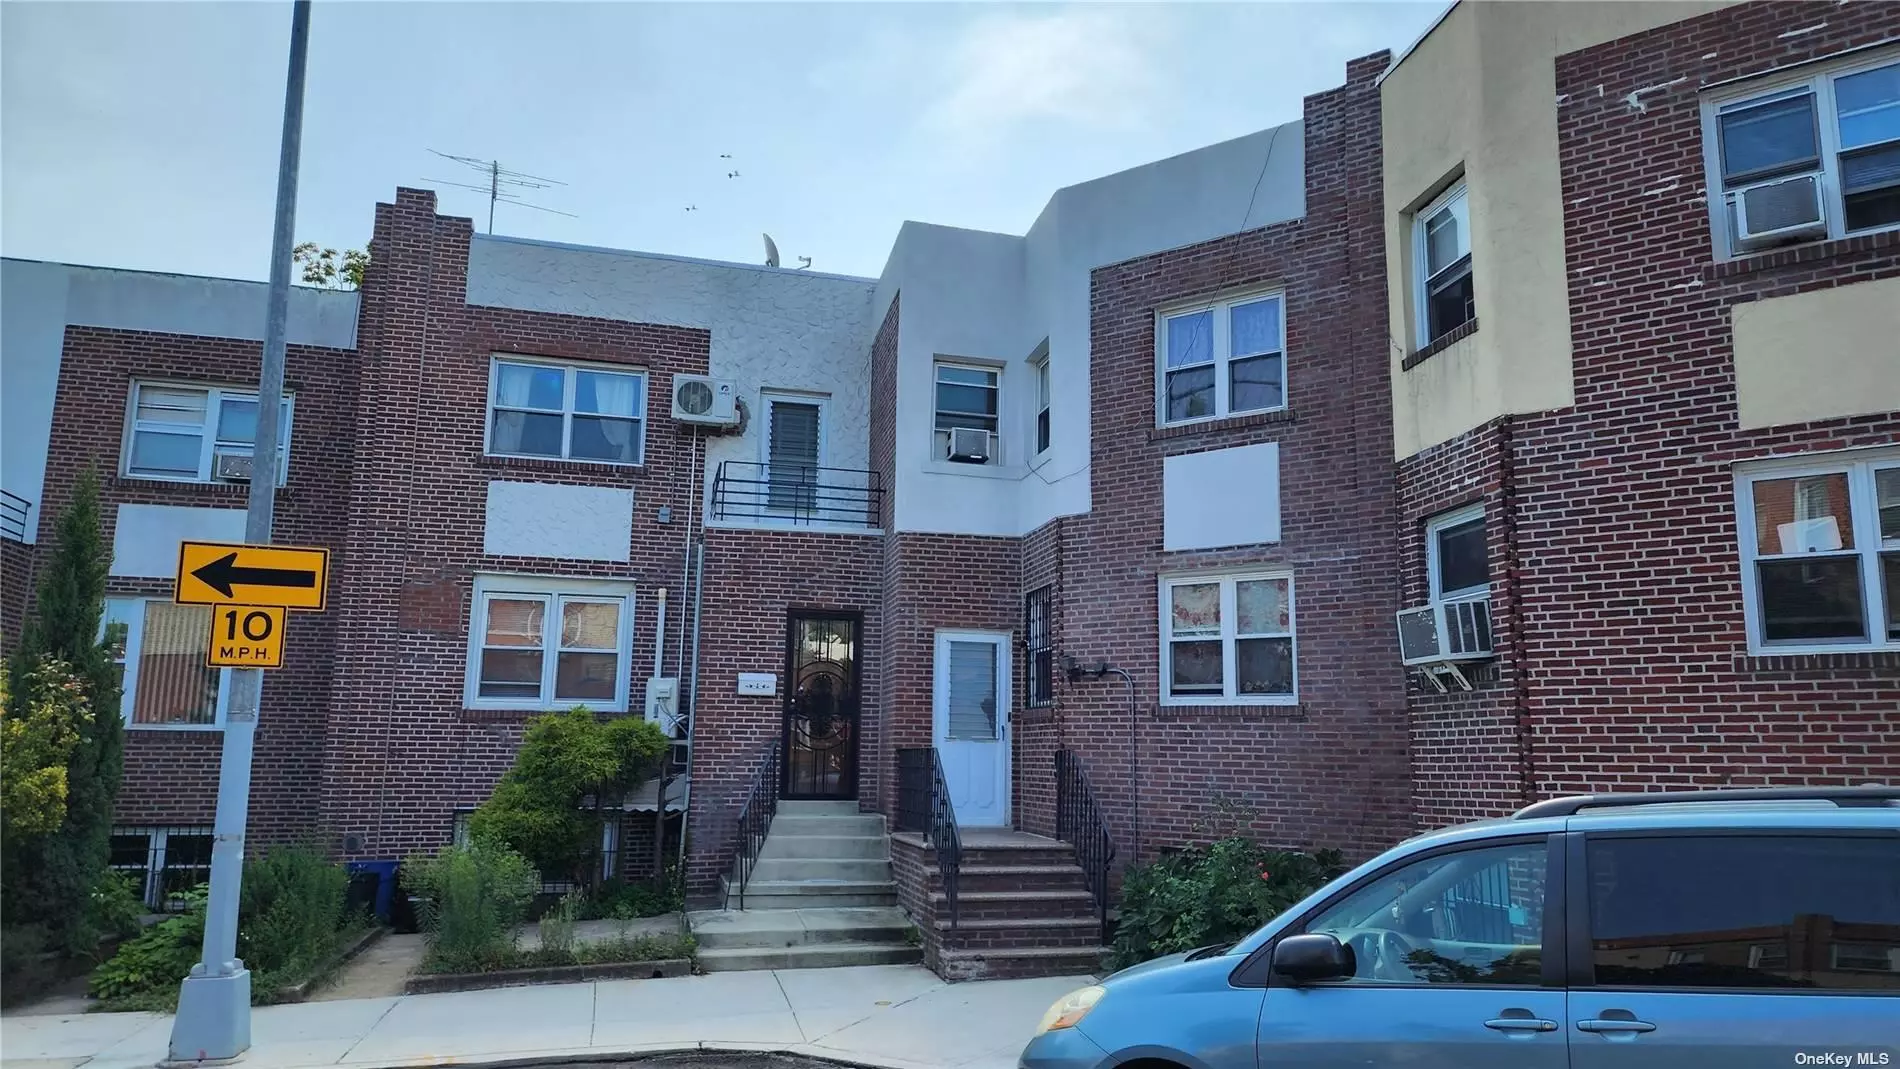 Legal Brick 2 Fam in prime Elmhurst, on the border of Maspeth. 1st FL used w/BSMT as one unit. Split A/C on 1st & 2nd FL. Central A/C for Walk-out BSMT. Quiet Street. Close to all. Very well maintained property. Must see to appreciate.